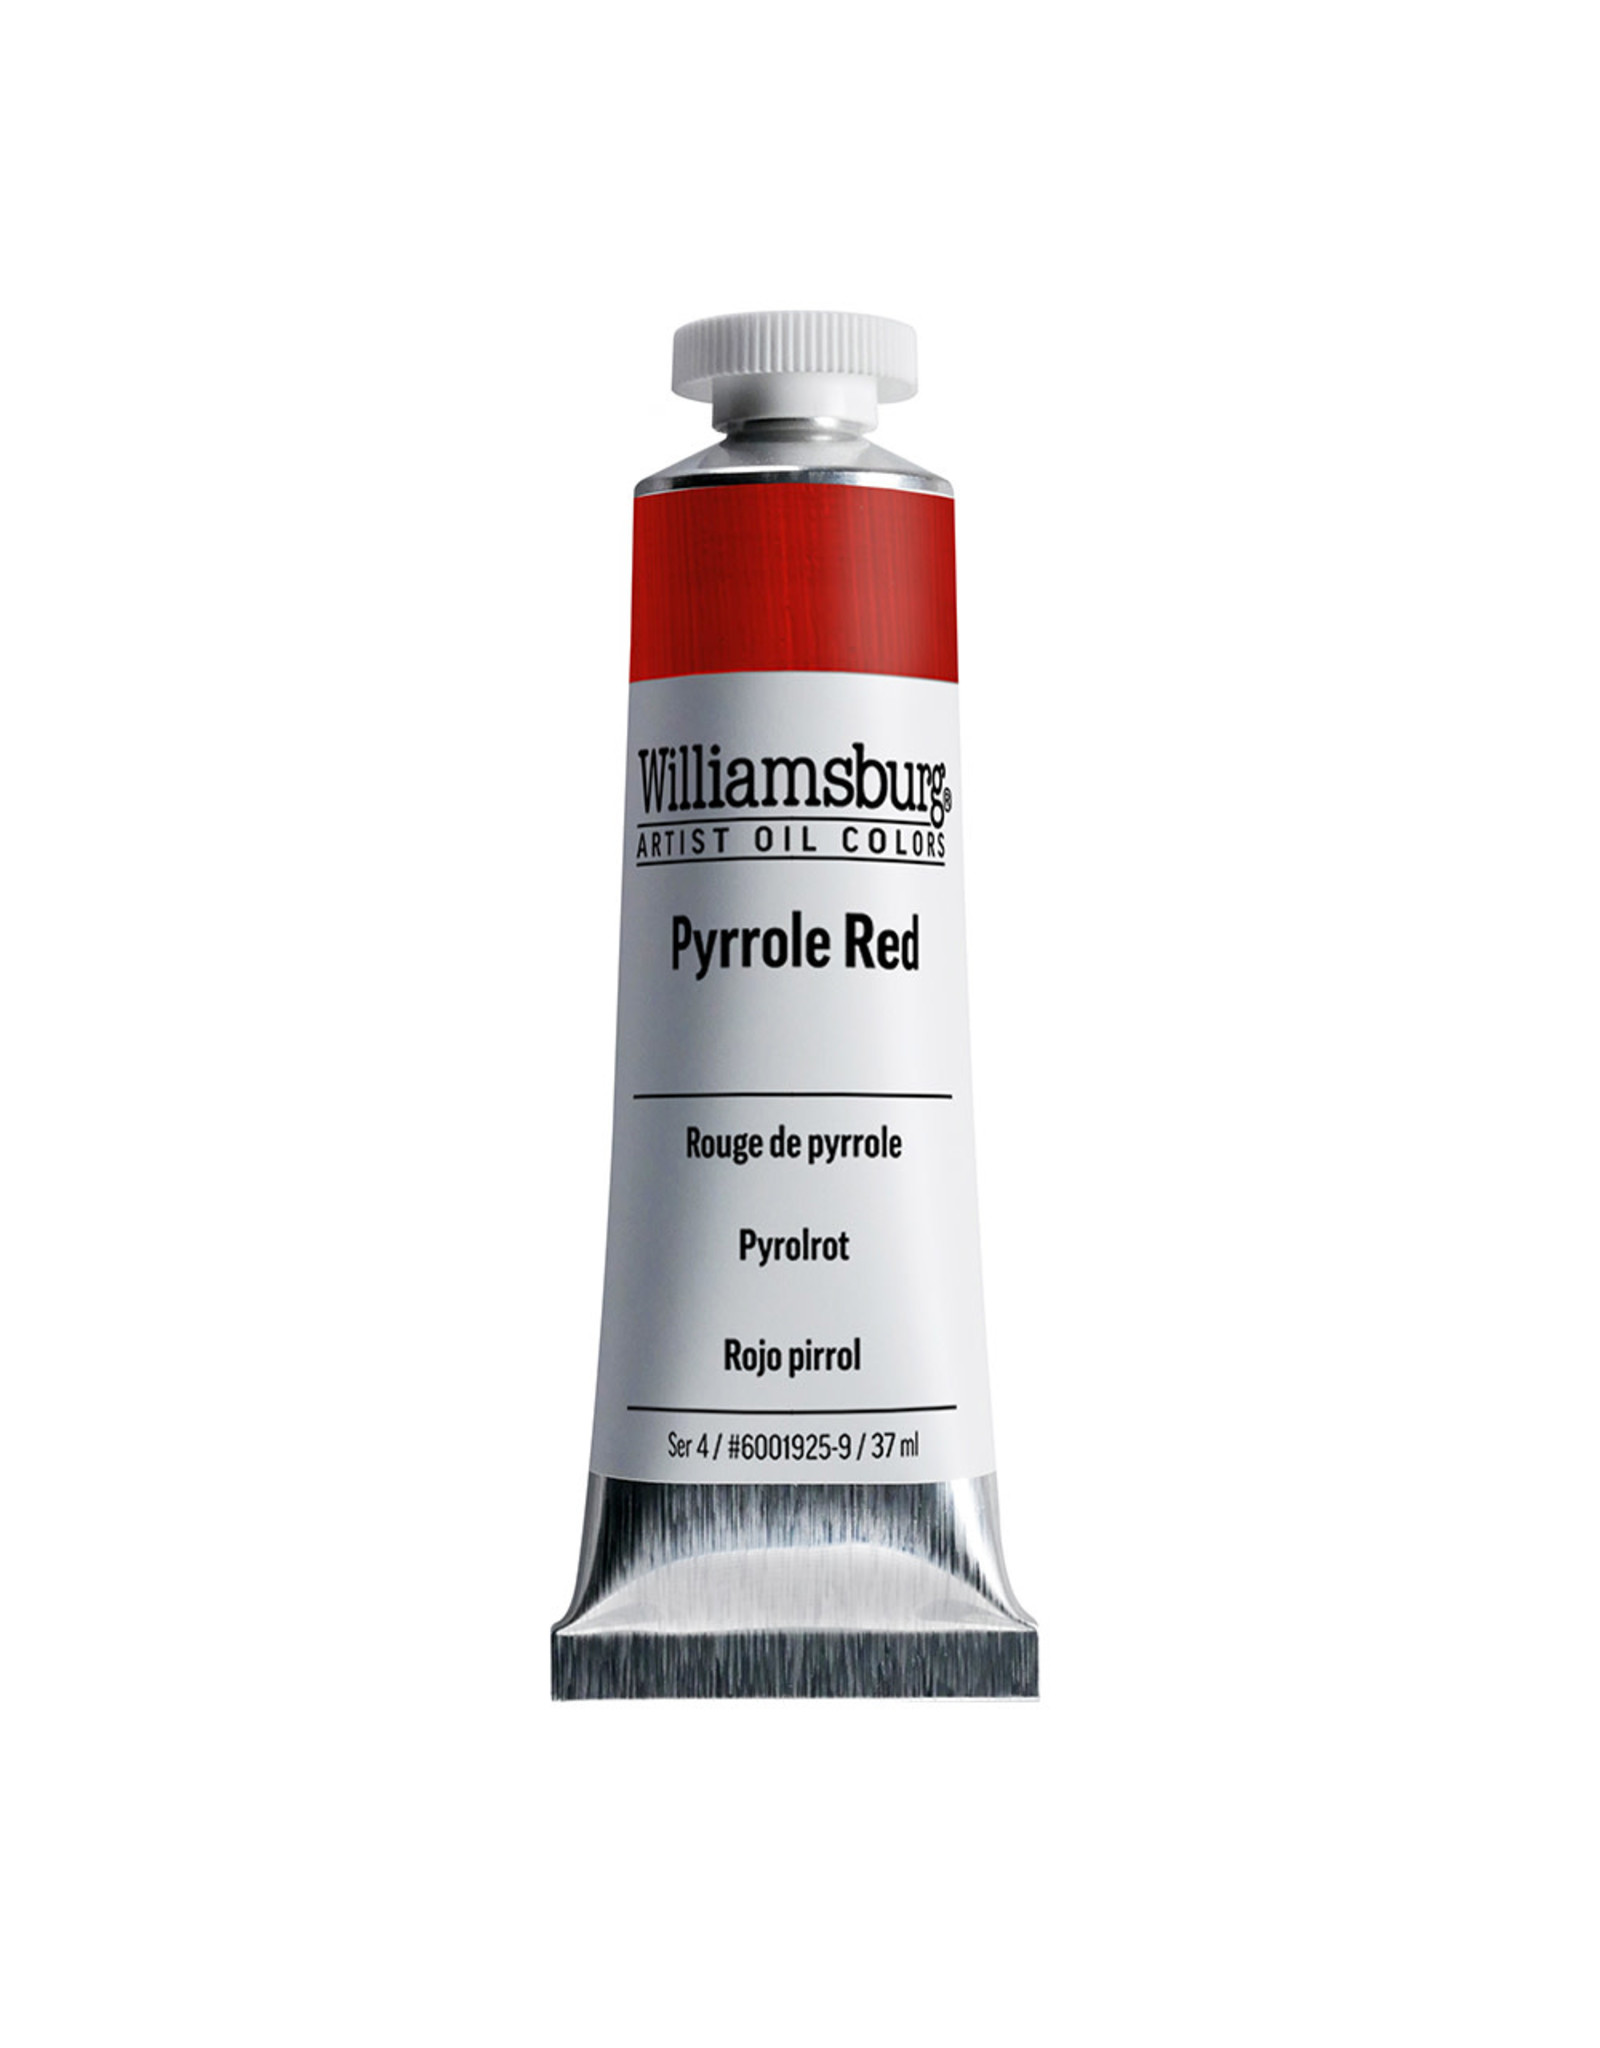 Golden Williamsburg Handmade Oil Colors, Pyrrole Red 37ml